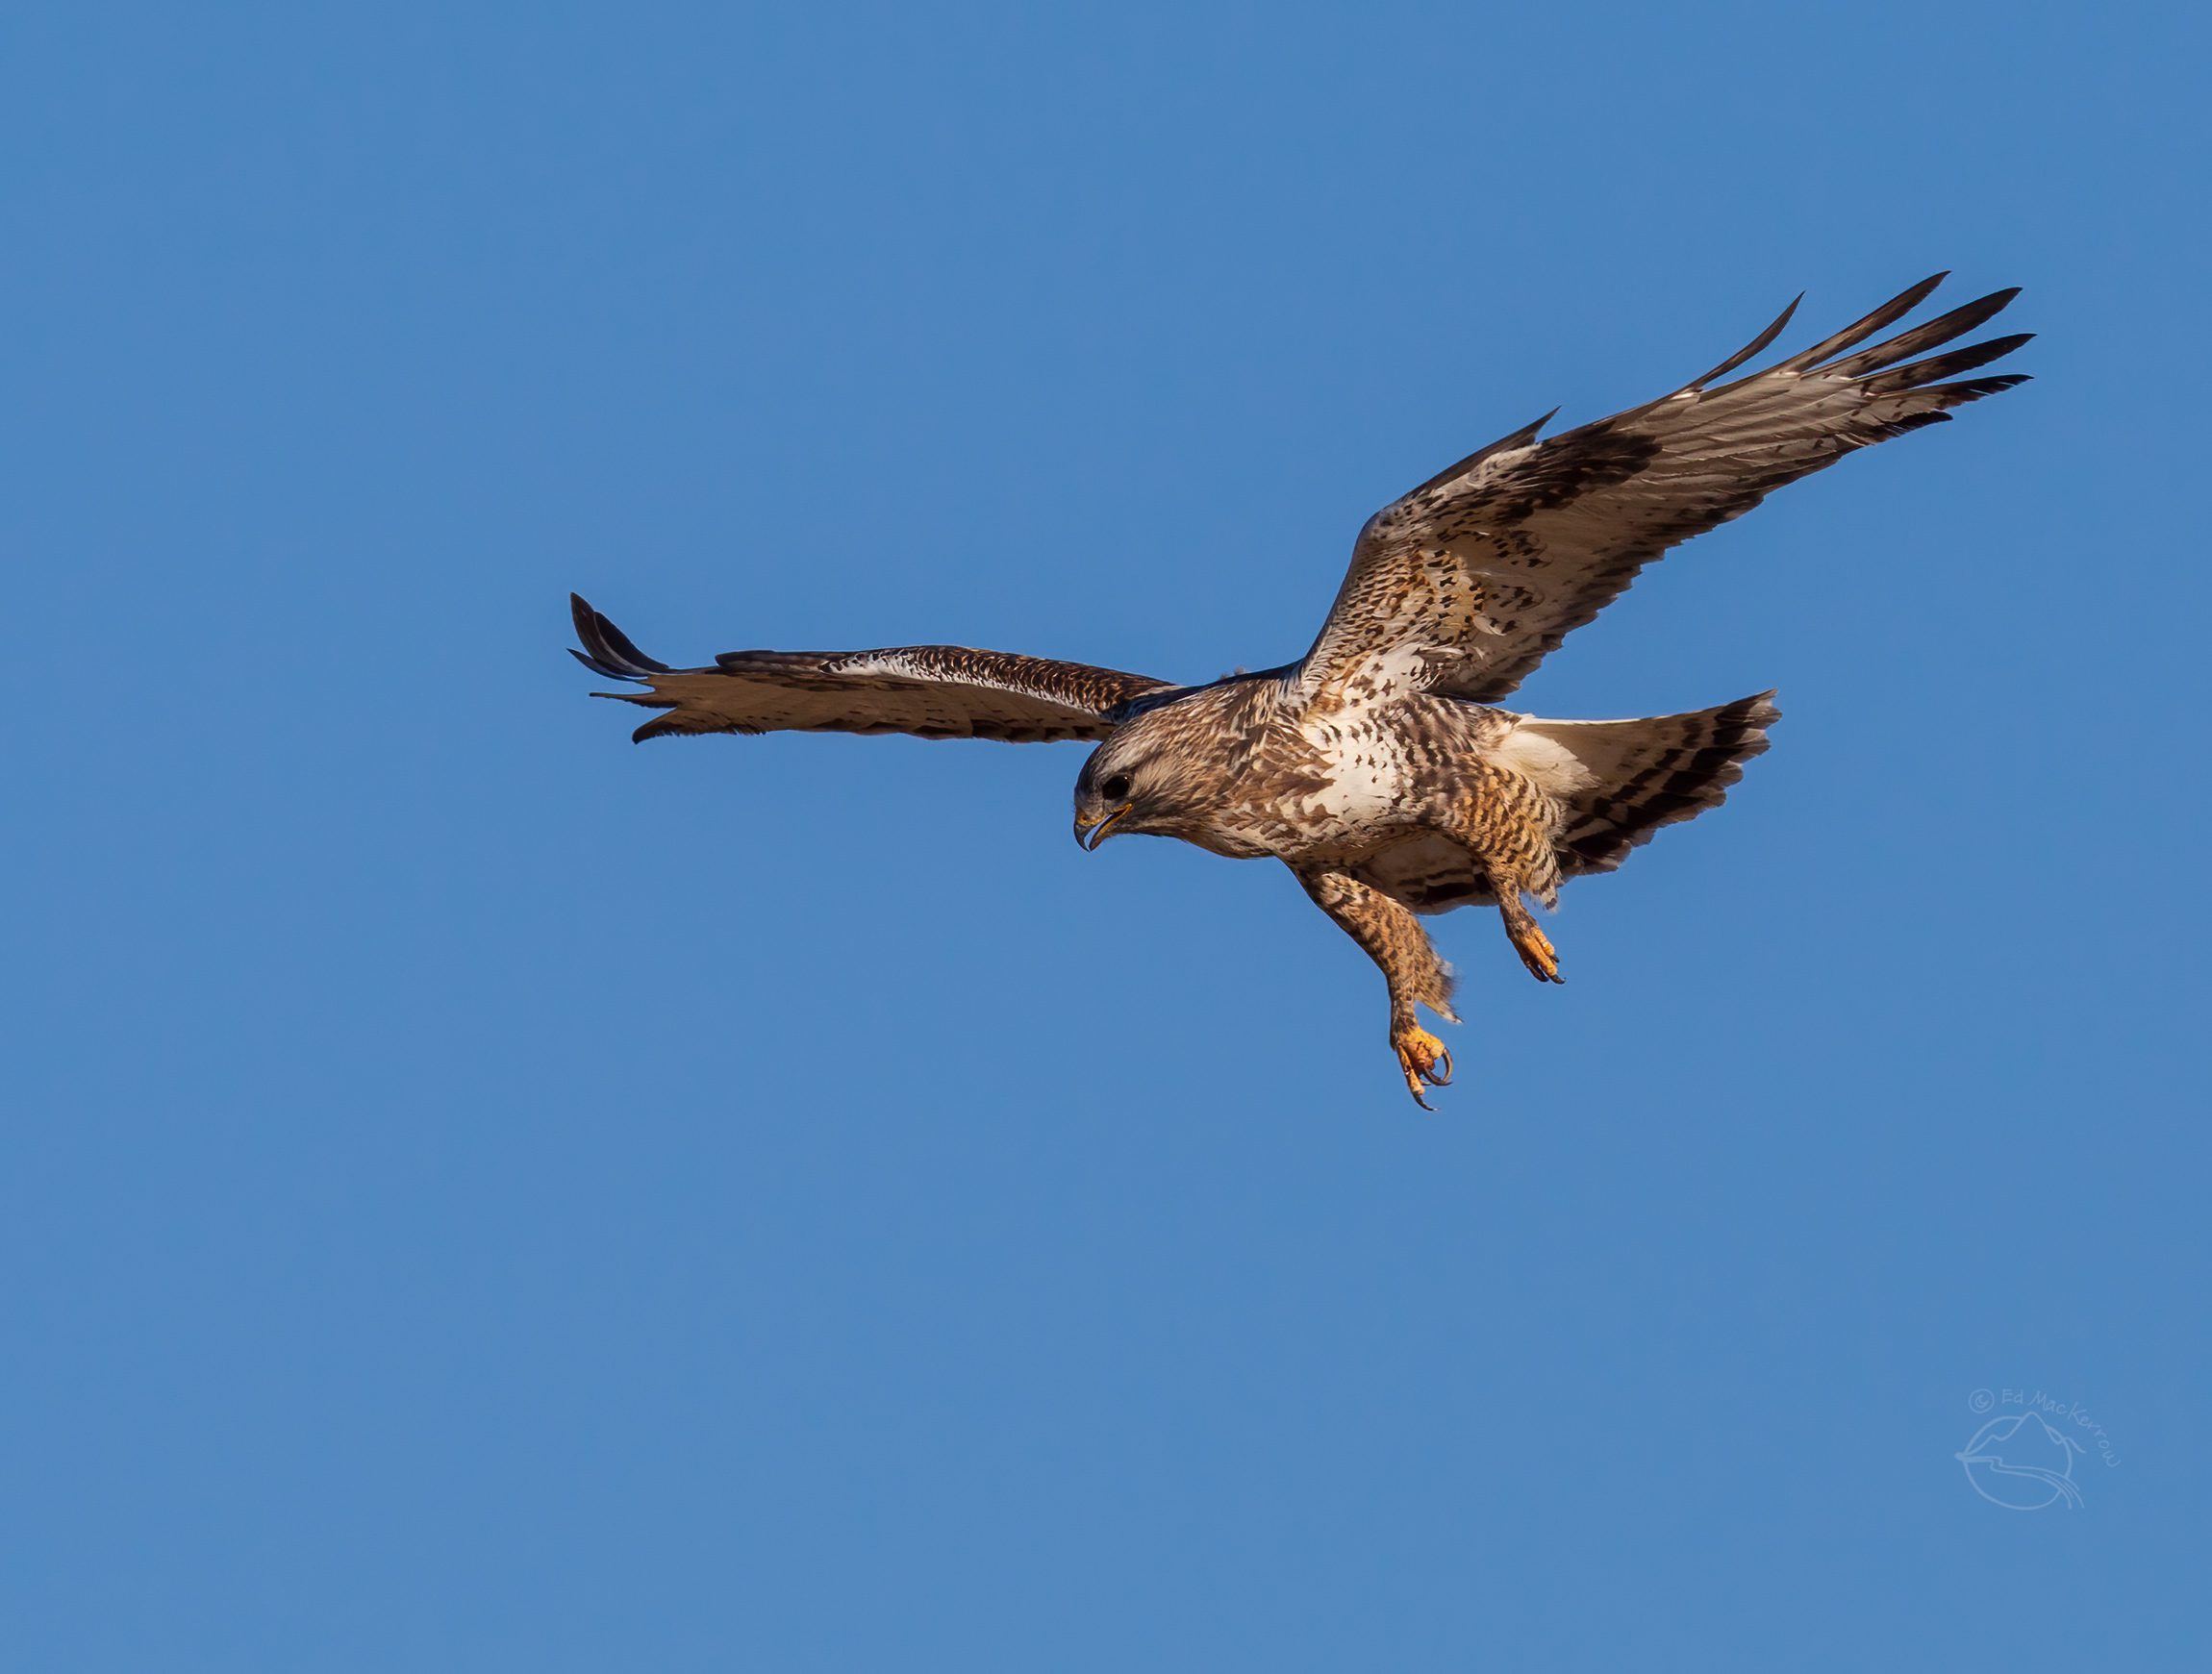 Rough-legged hawk about to pounce on prey